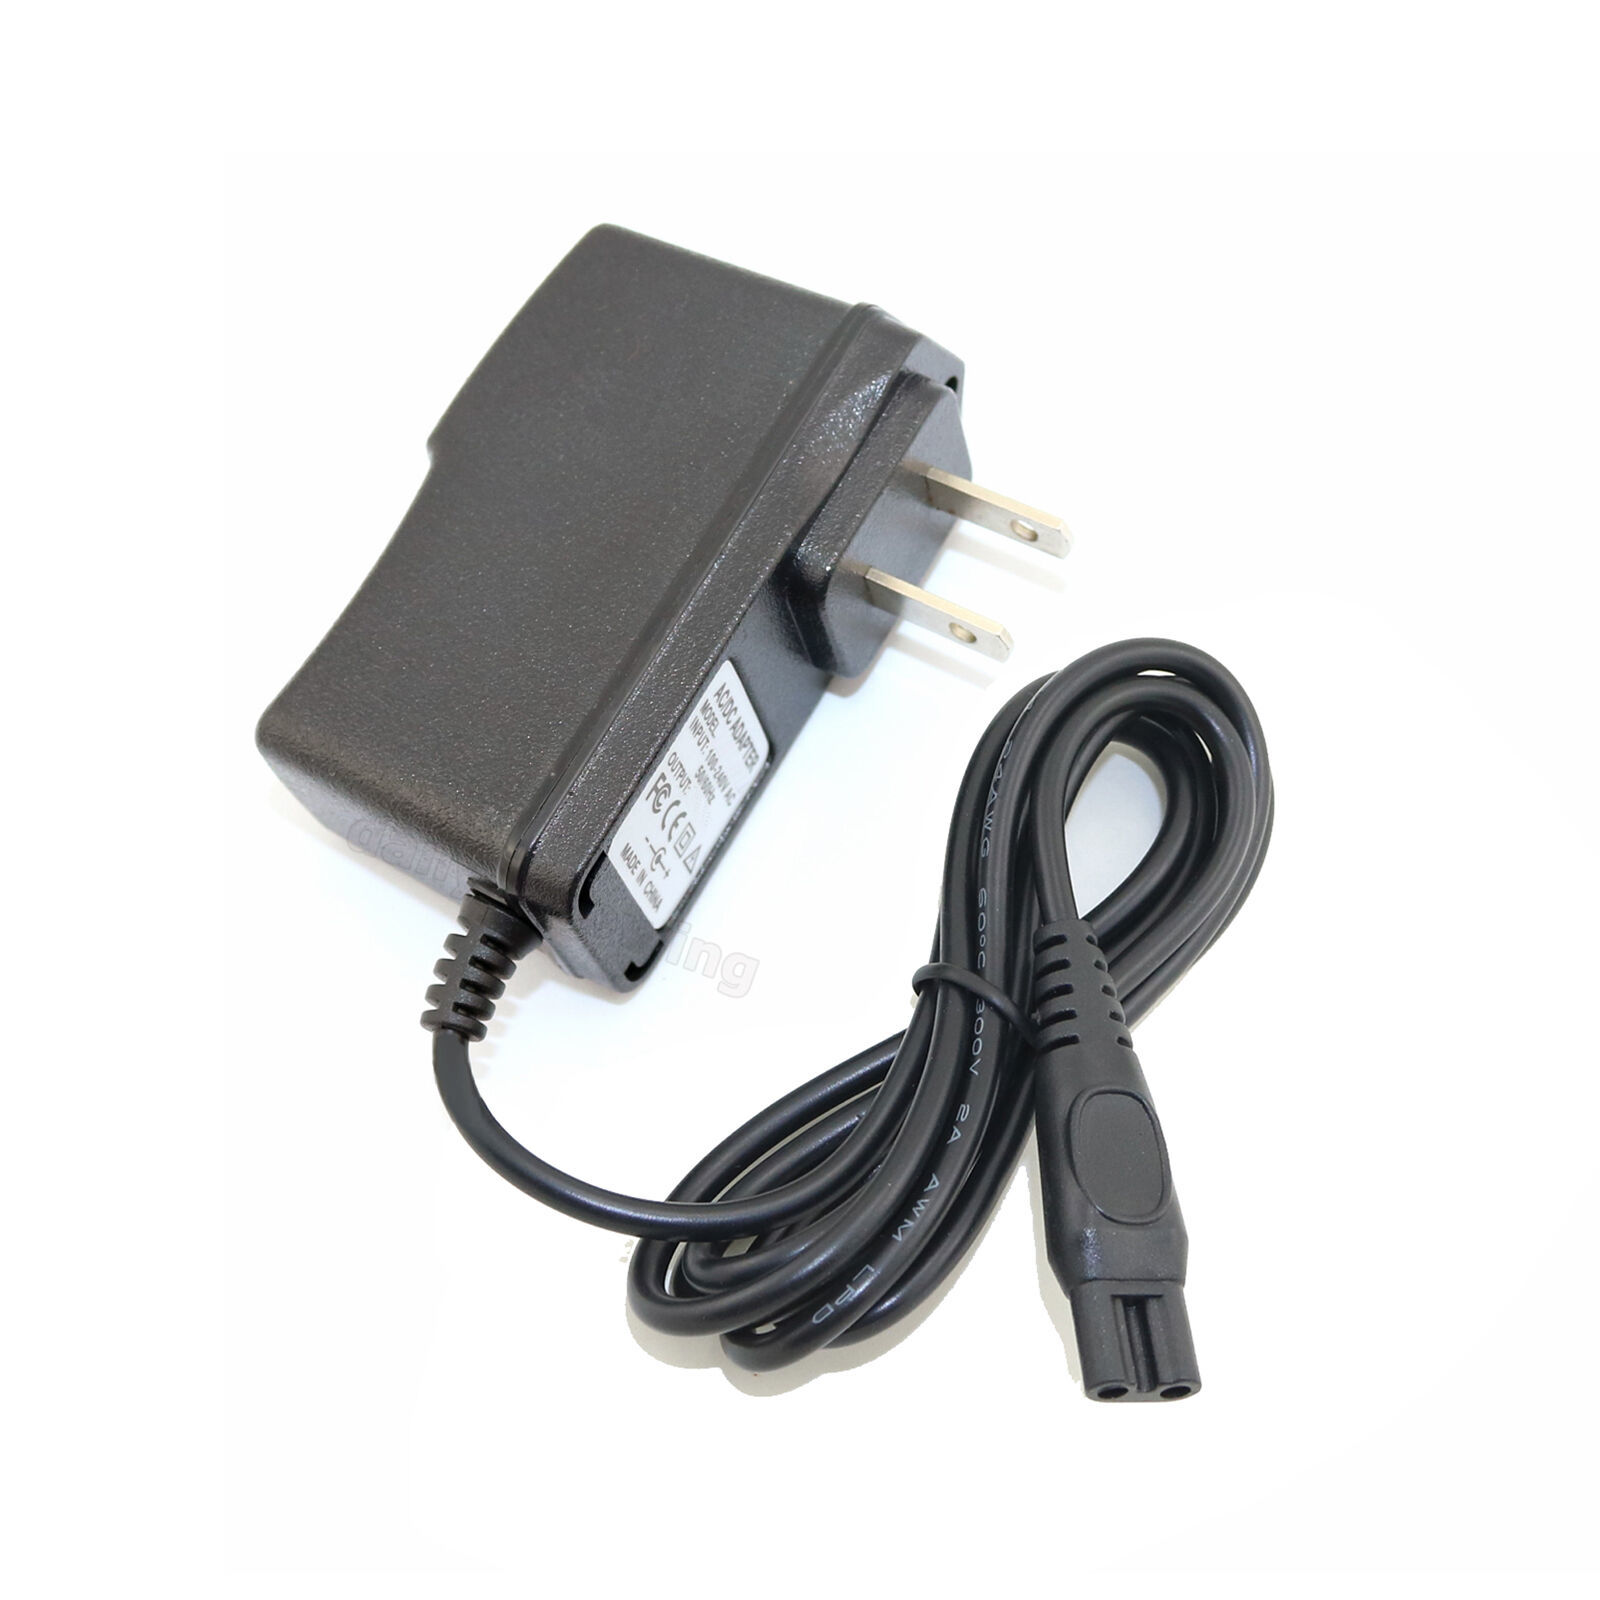 Primary image for Ac Adapter Wall Home Charger For Philips Norelco Trimmer Qt4090 Qt4090/32 Qt4070